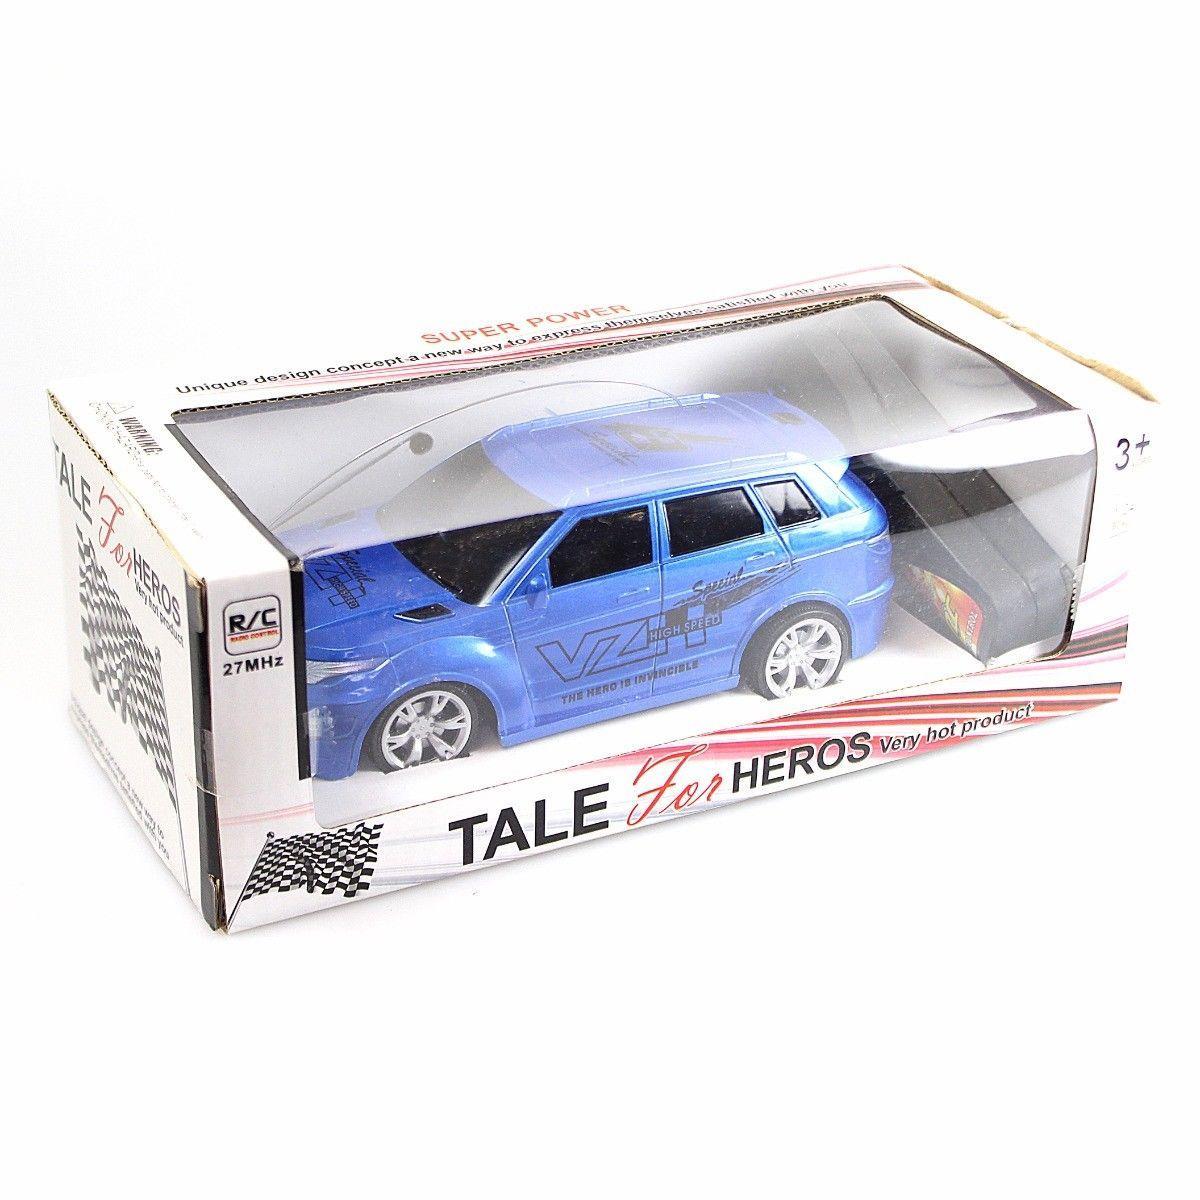 Tale For Heroes Racing Car (Parcel Rate)